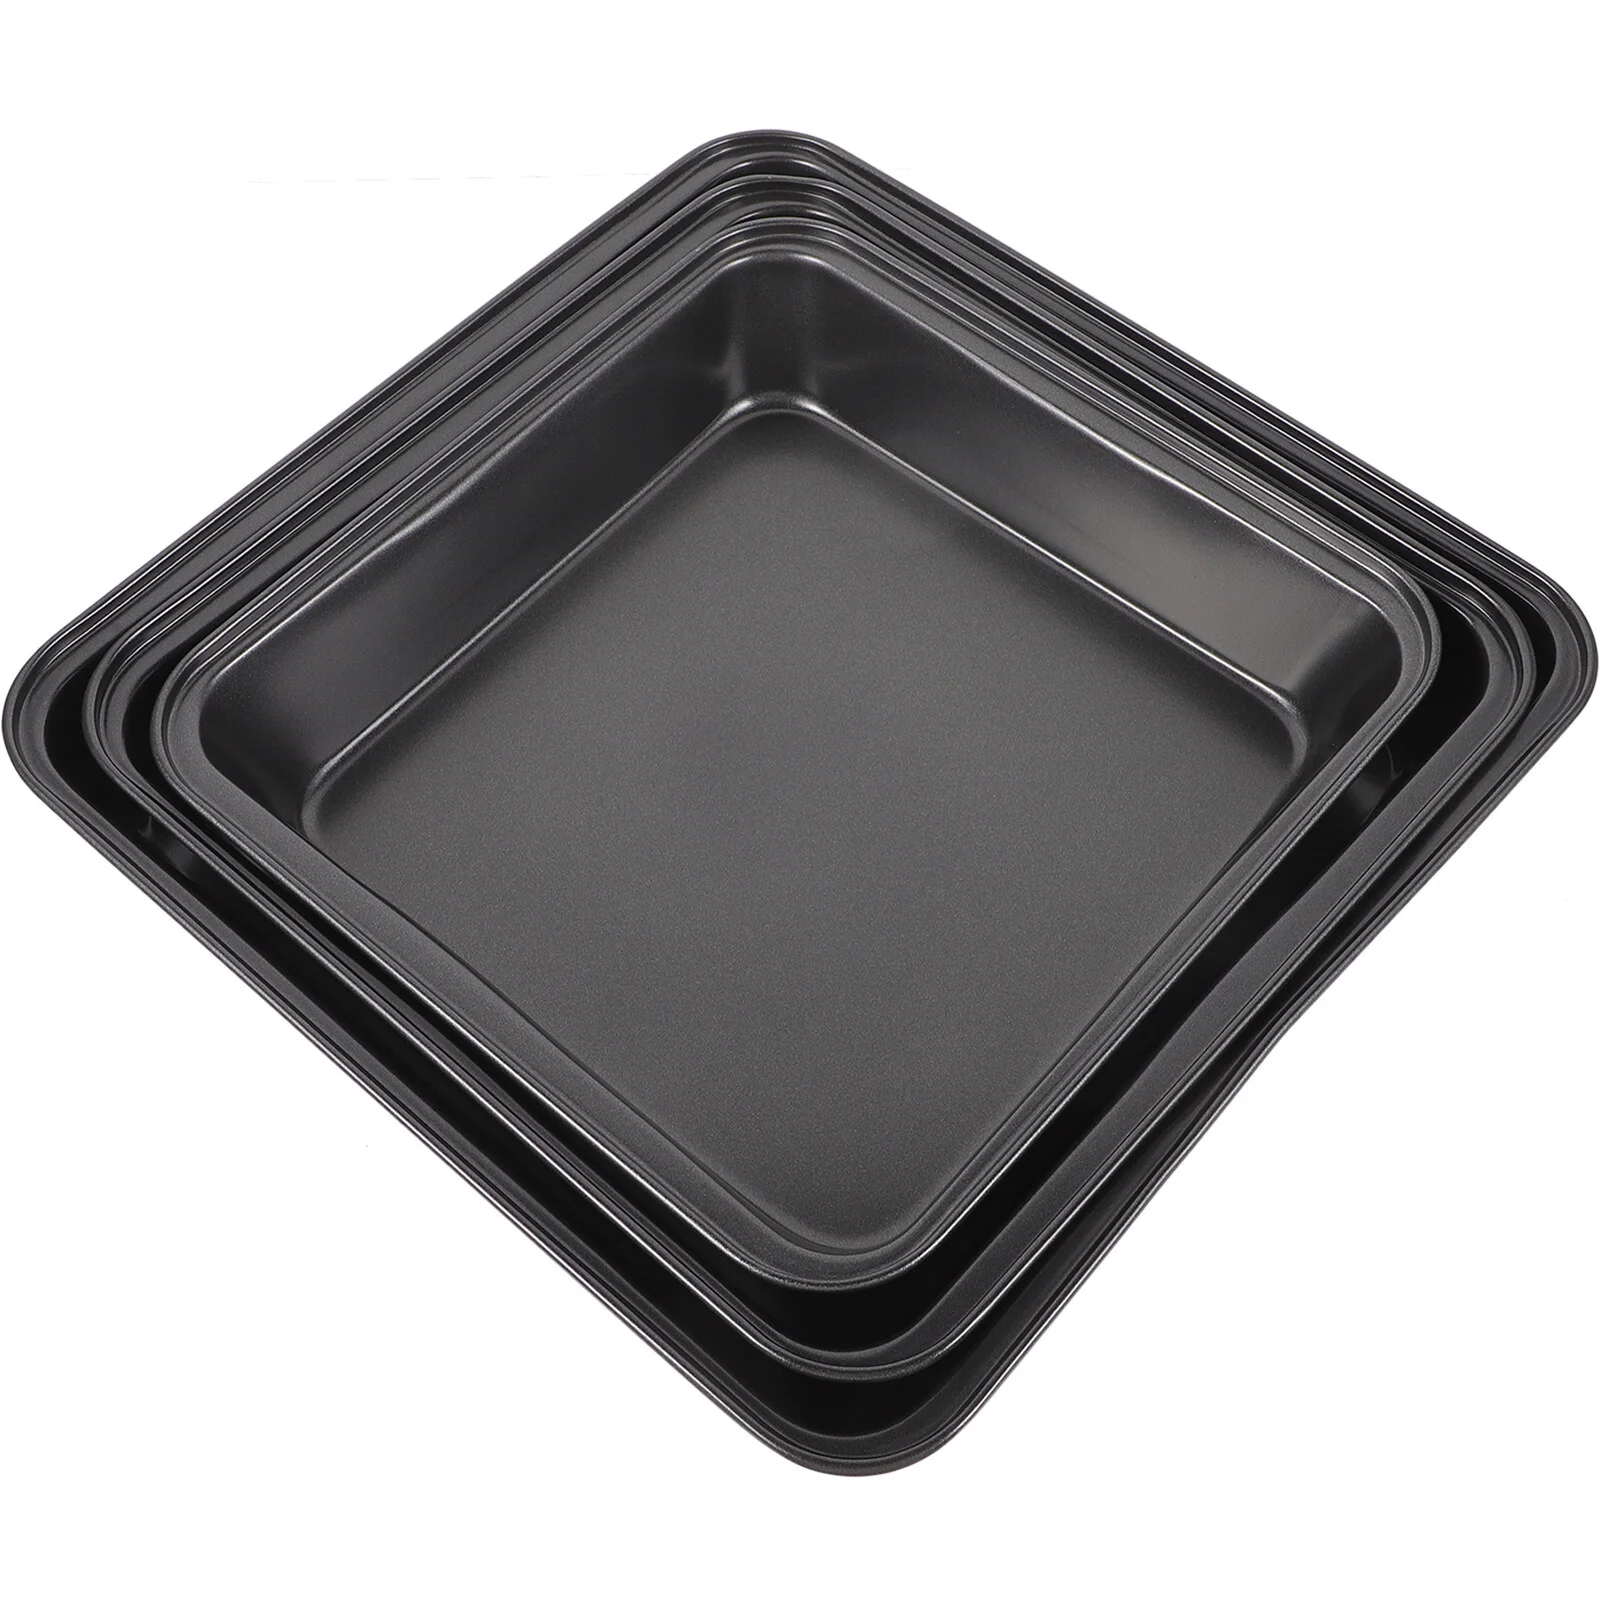 https://ae01.alicdn.com/kf/Sef94bf7ff68a490cbdc002aa783b4428R/Detroit-Banquet-Food-Plate-Carbon-Steel-Serving-Tray-Home-Baking-Pan-Kitchen-Pizza-Container.jpg